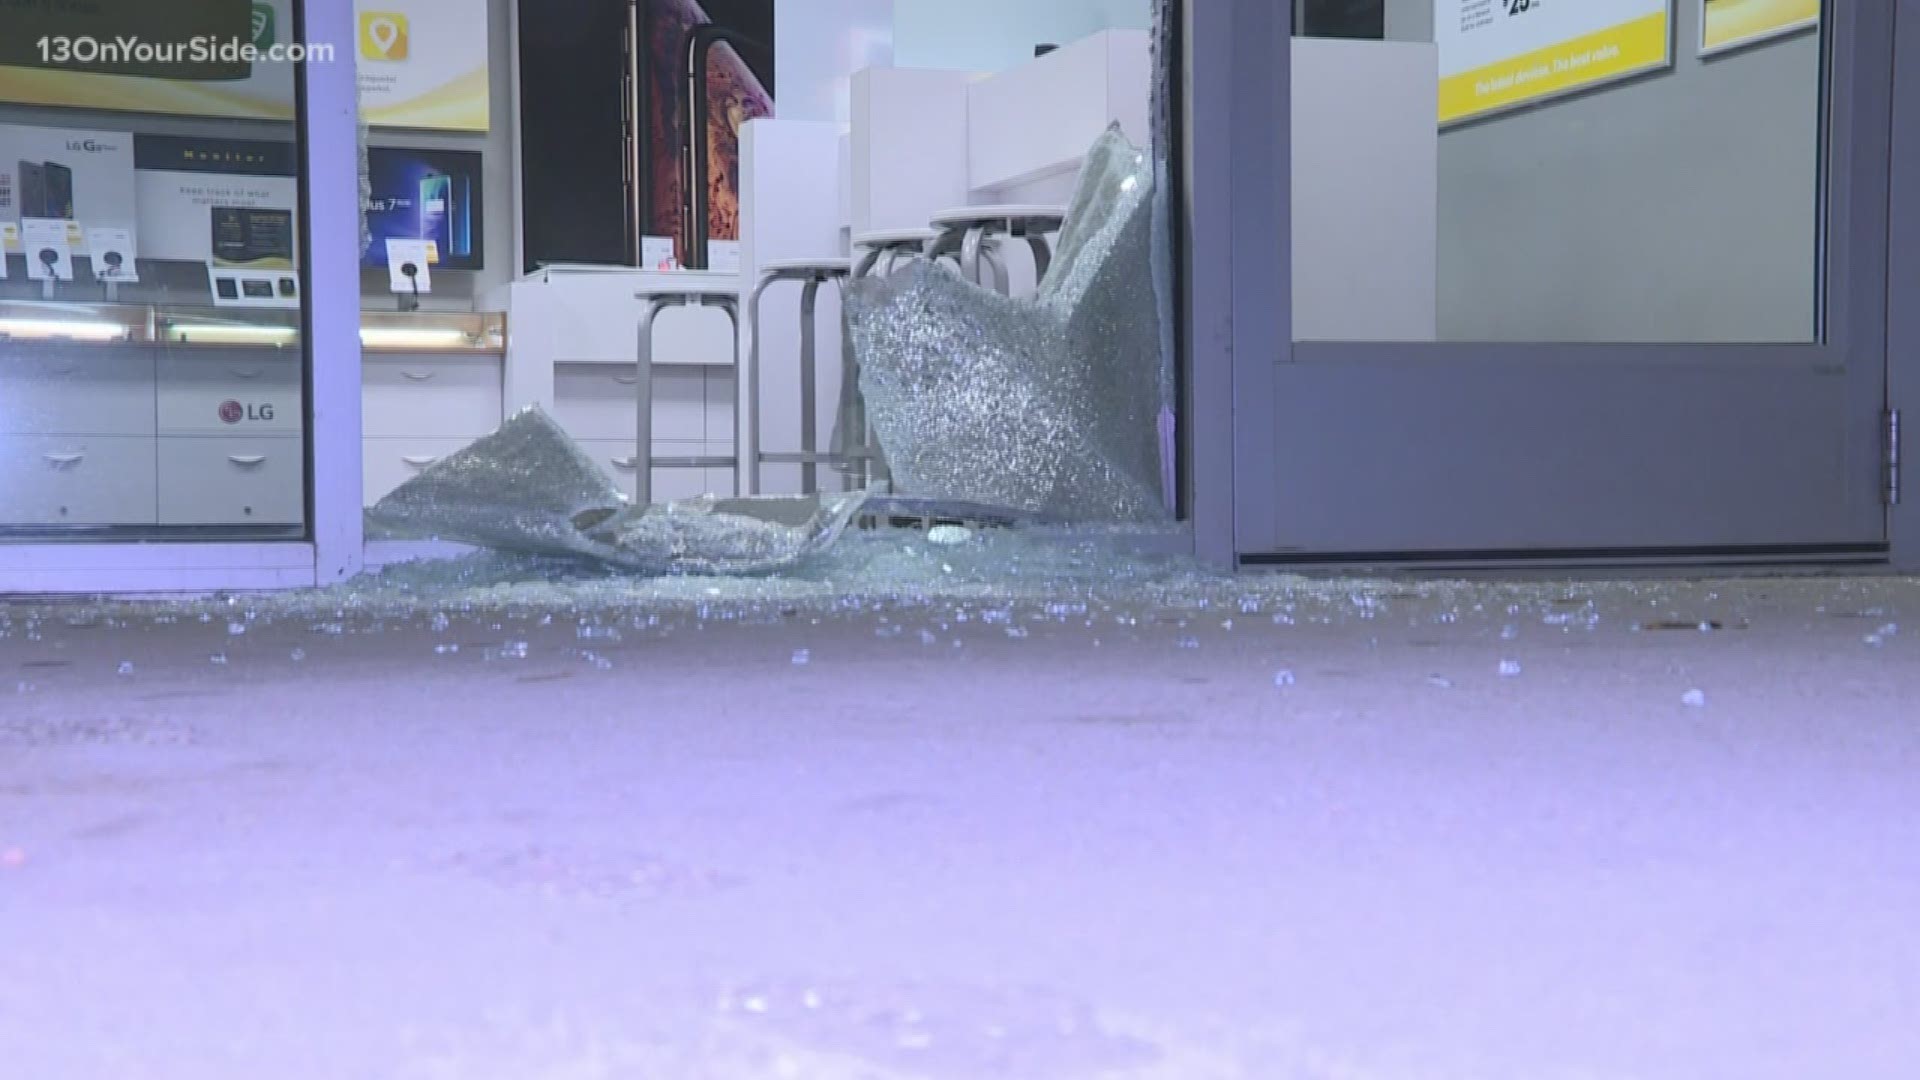 Yet another cell phone store in the Kent County area was broken into Tuesday morning.